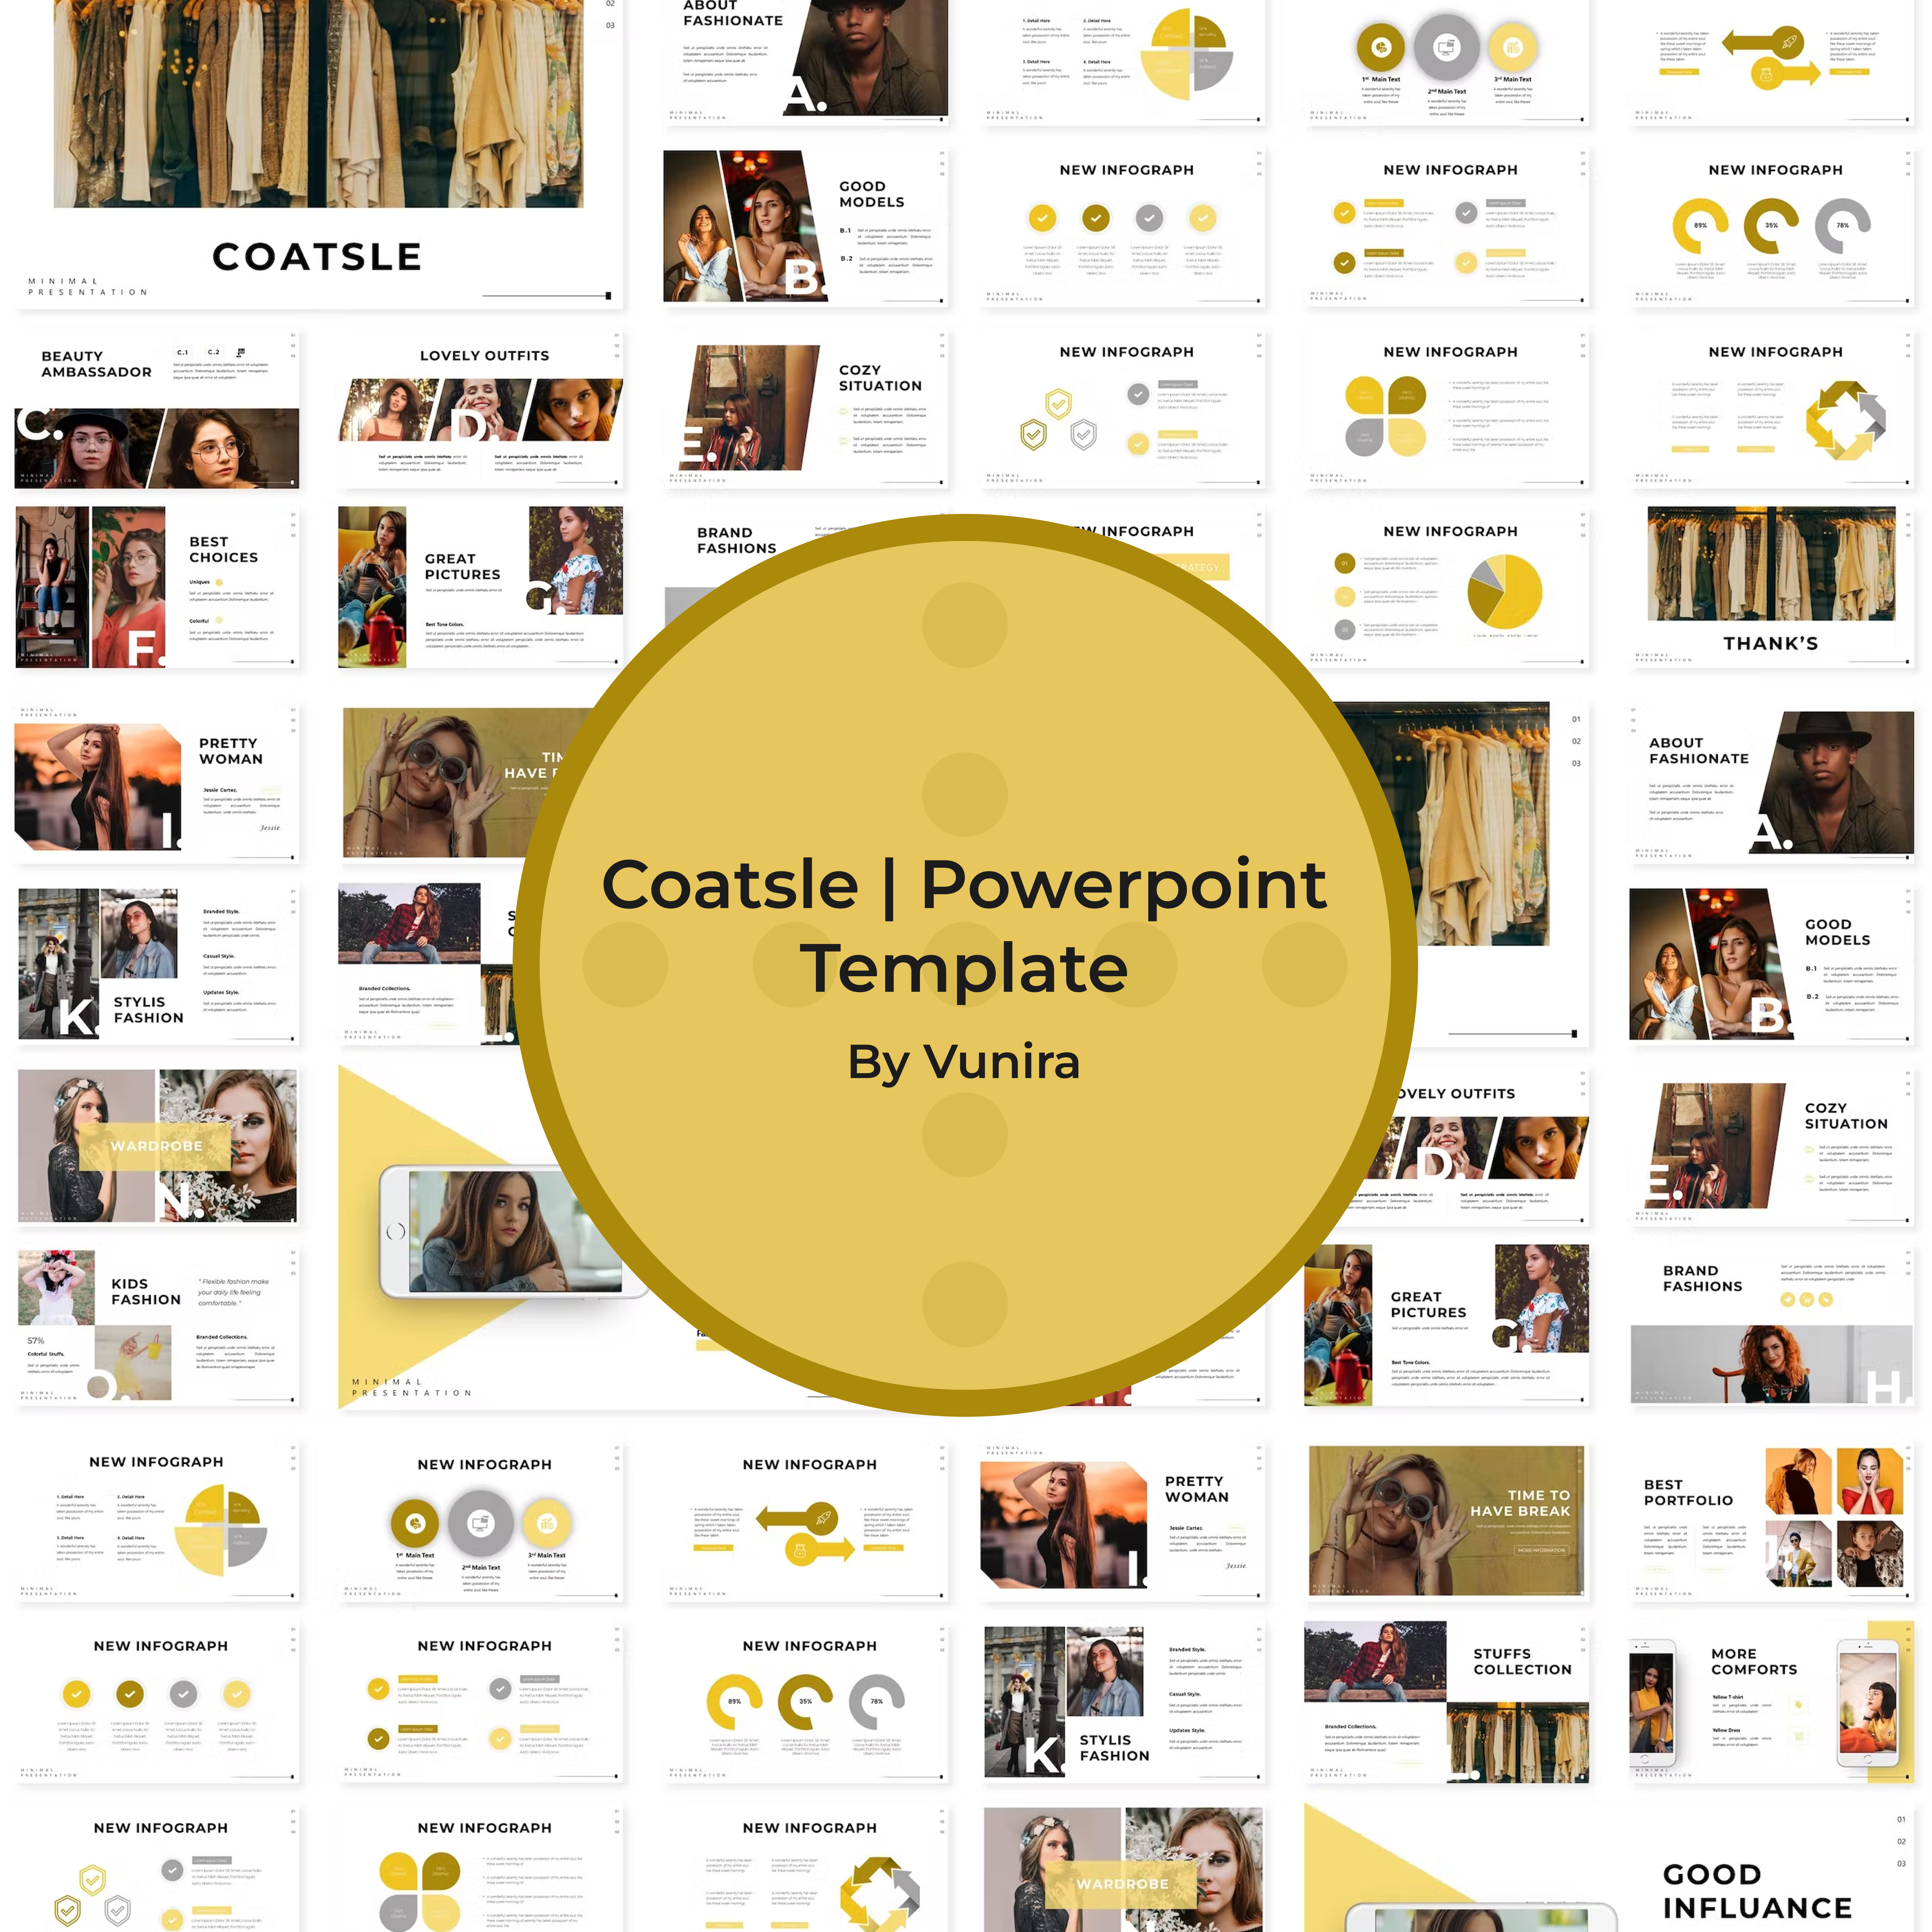 Preview coatsle powerpoint template.